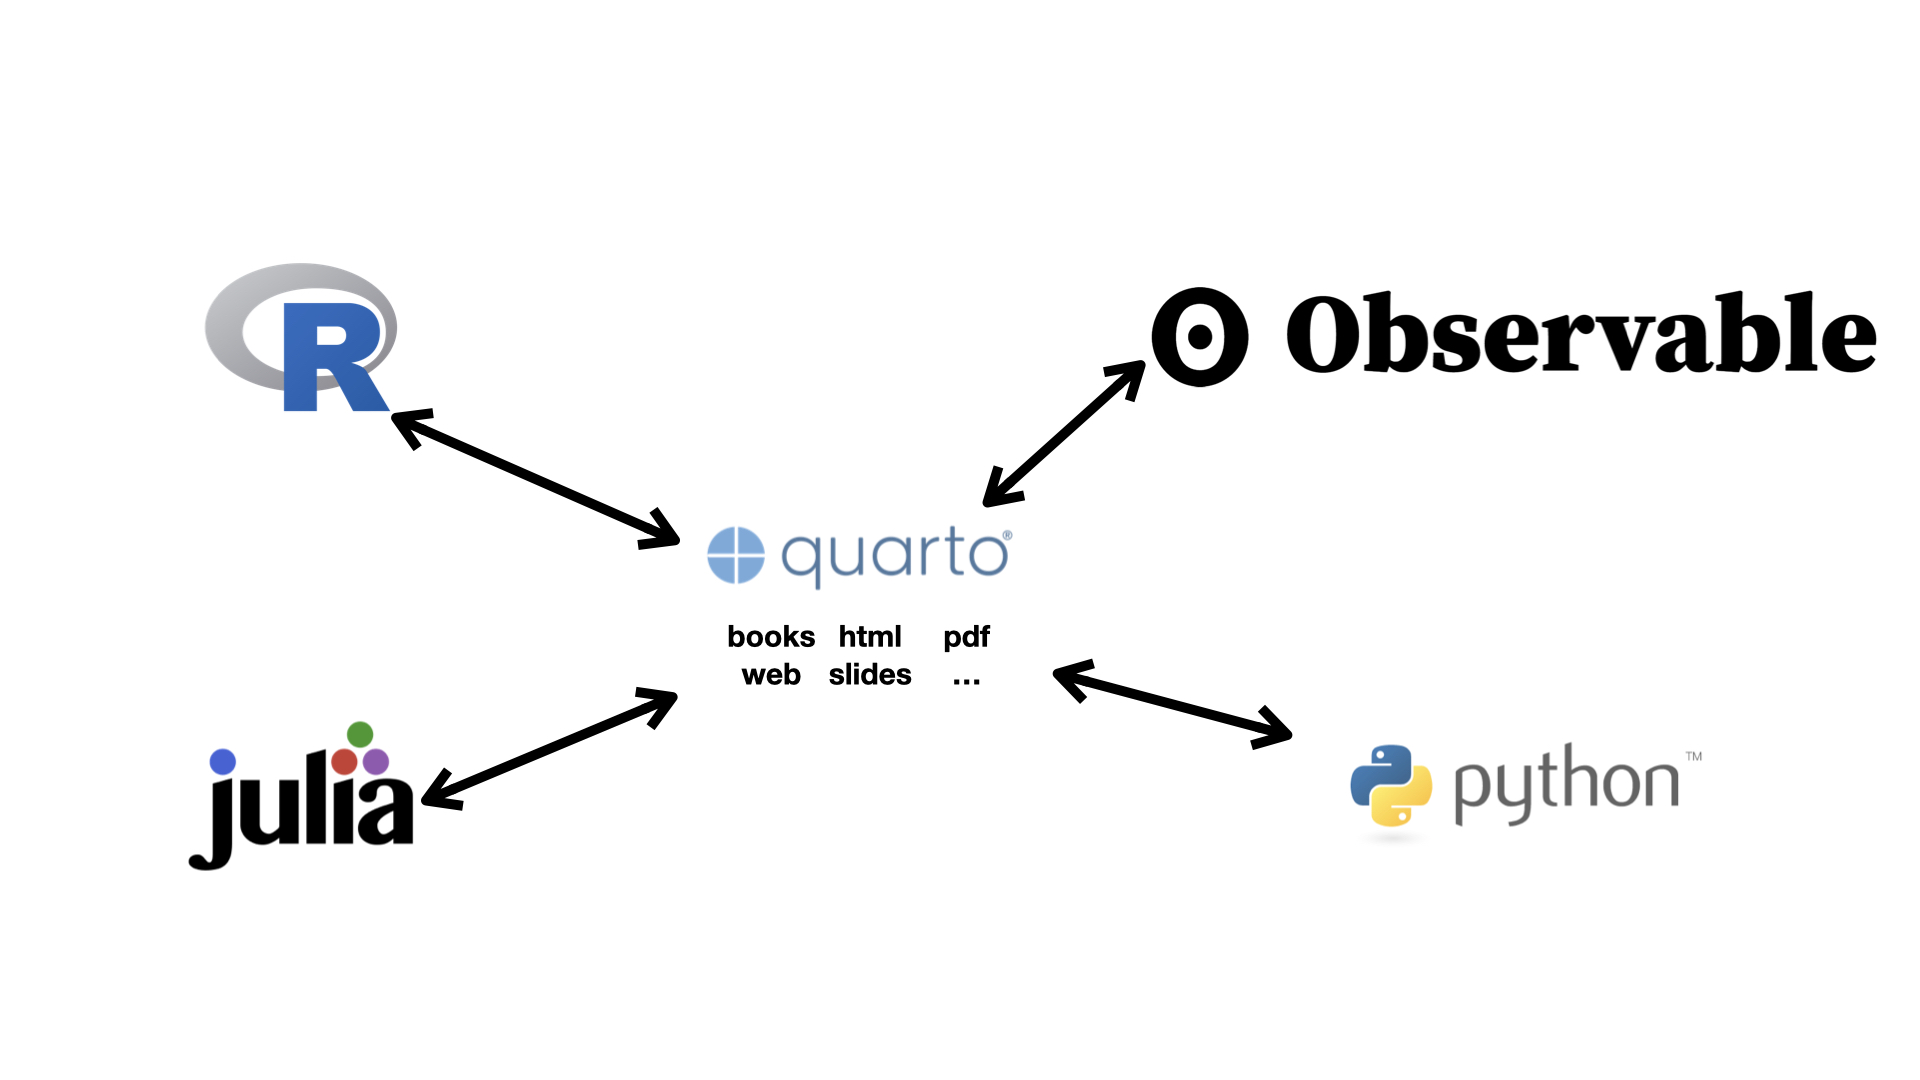 Diagram showing quarto links strongly to all languages